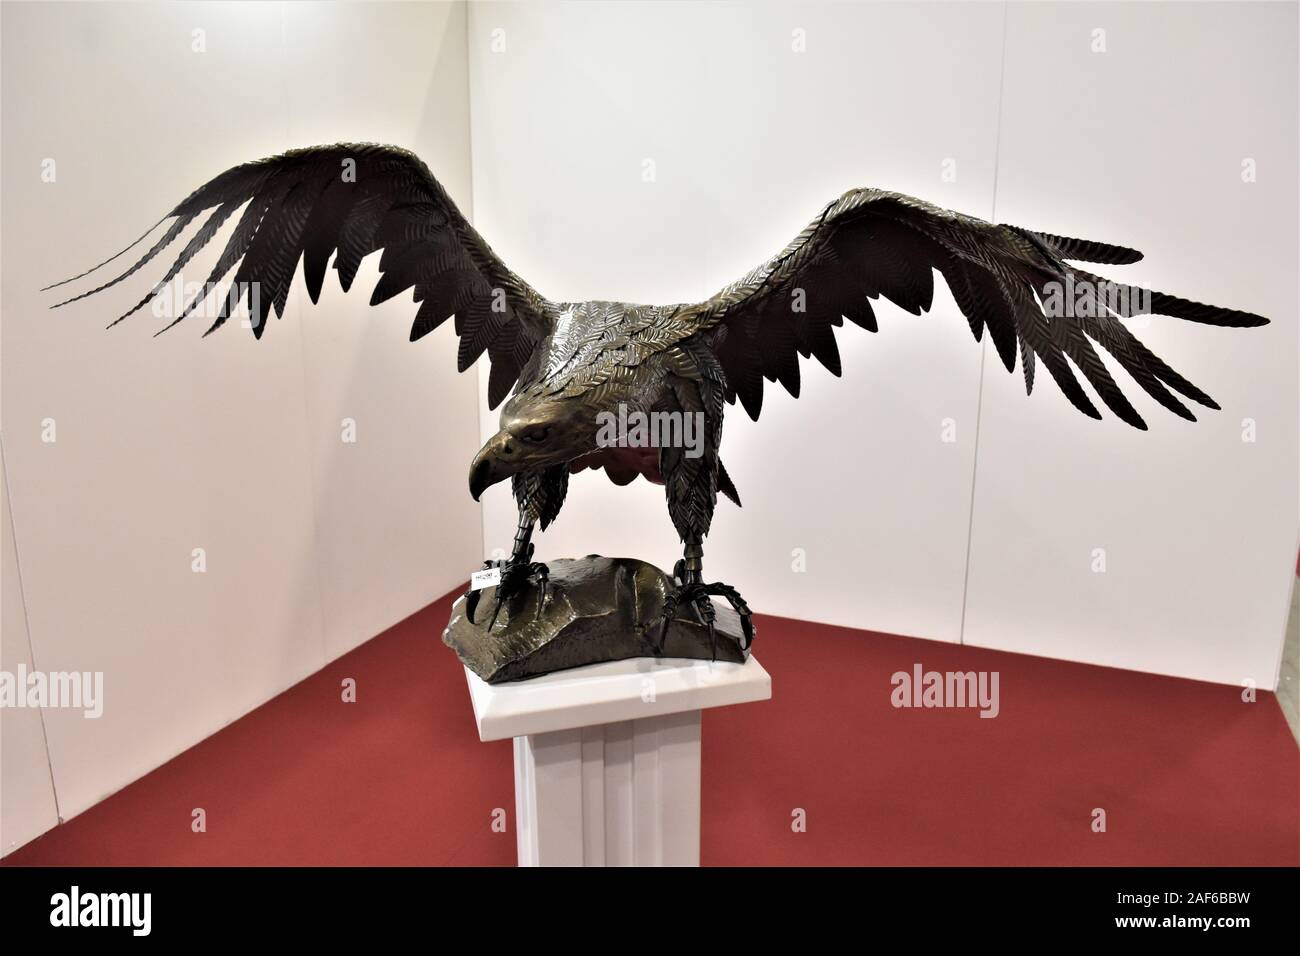 HANDICRAFT AND GASTRONOMY MARKET EXHIBITION.A WROUGHT IRON EAGLE Stock Photo